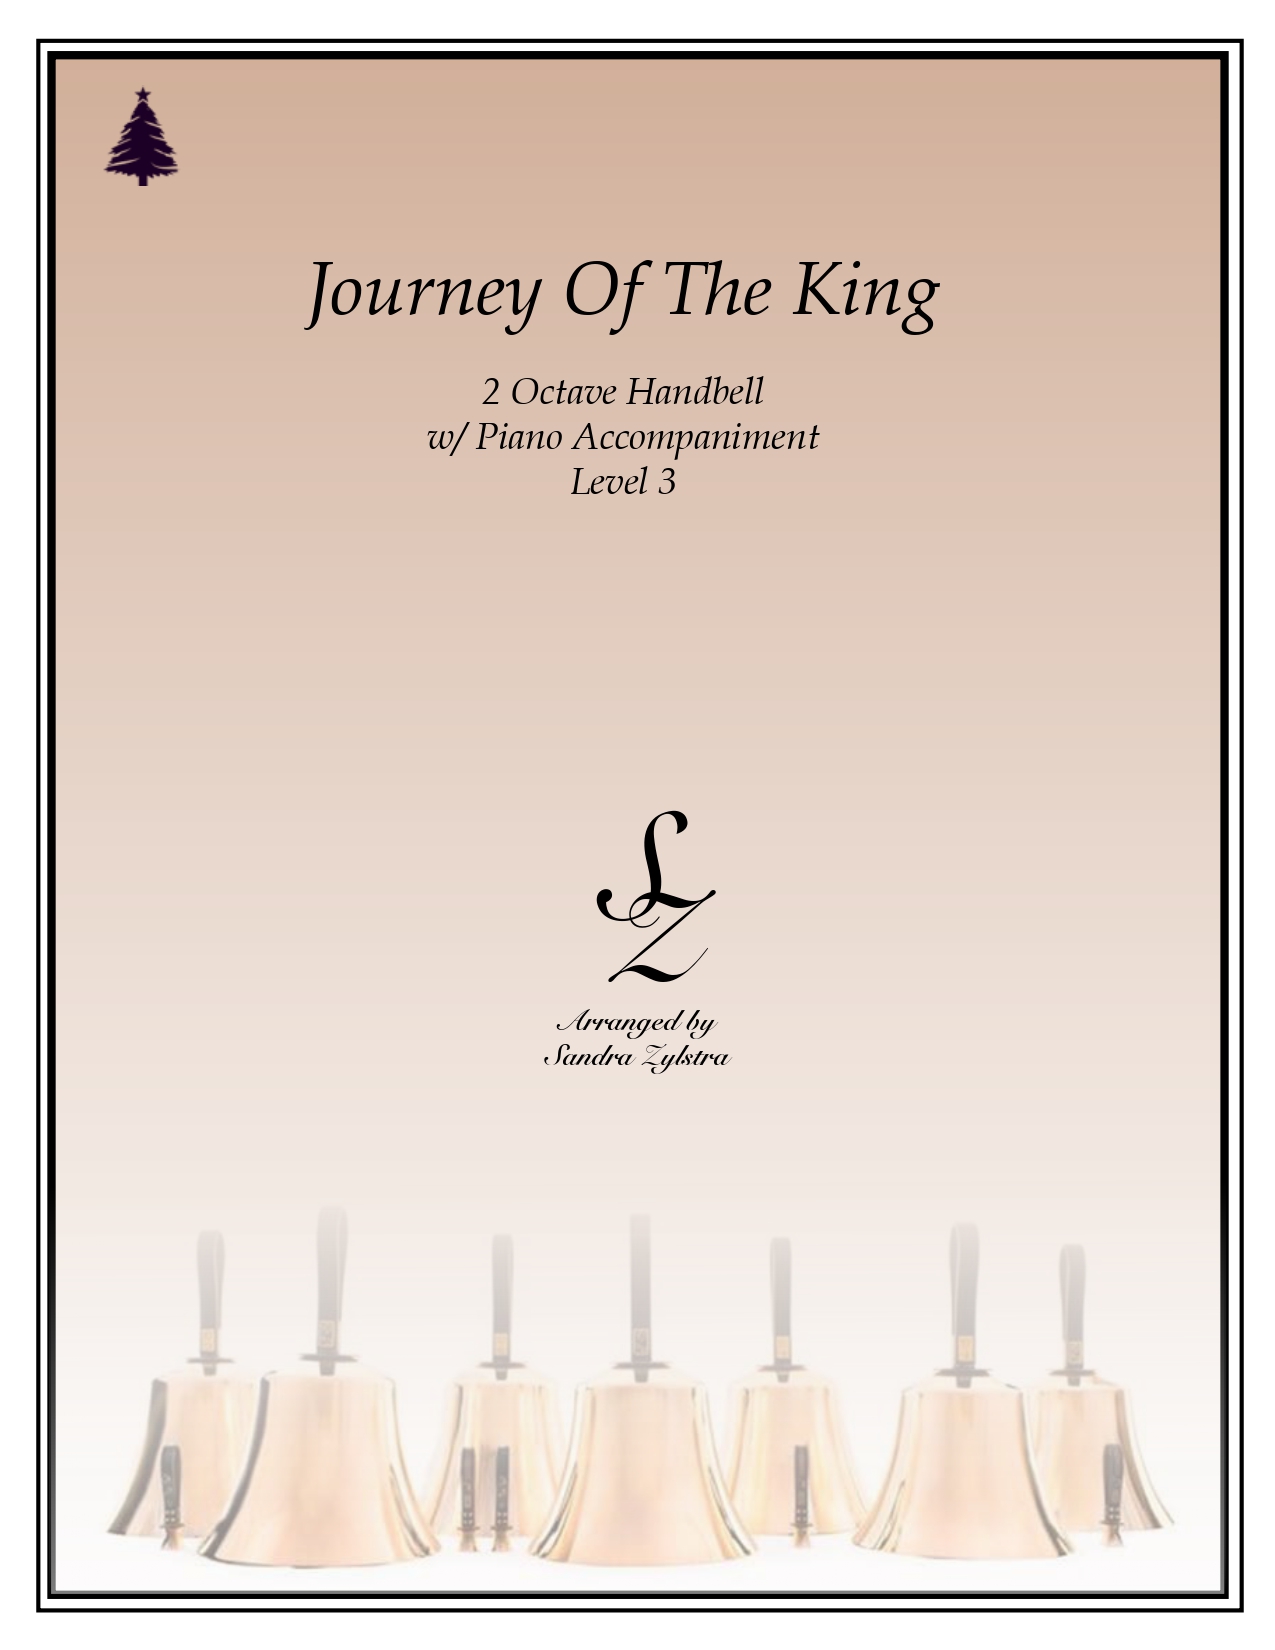 Journey Of The King 2 octave handbells piano cover page 00011